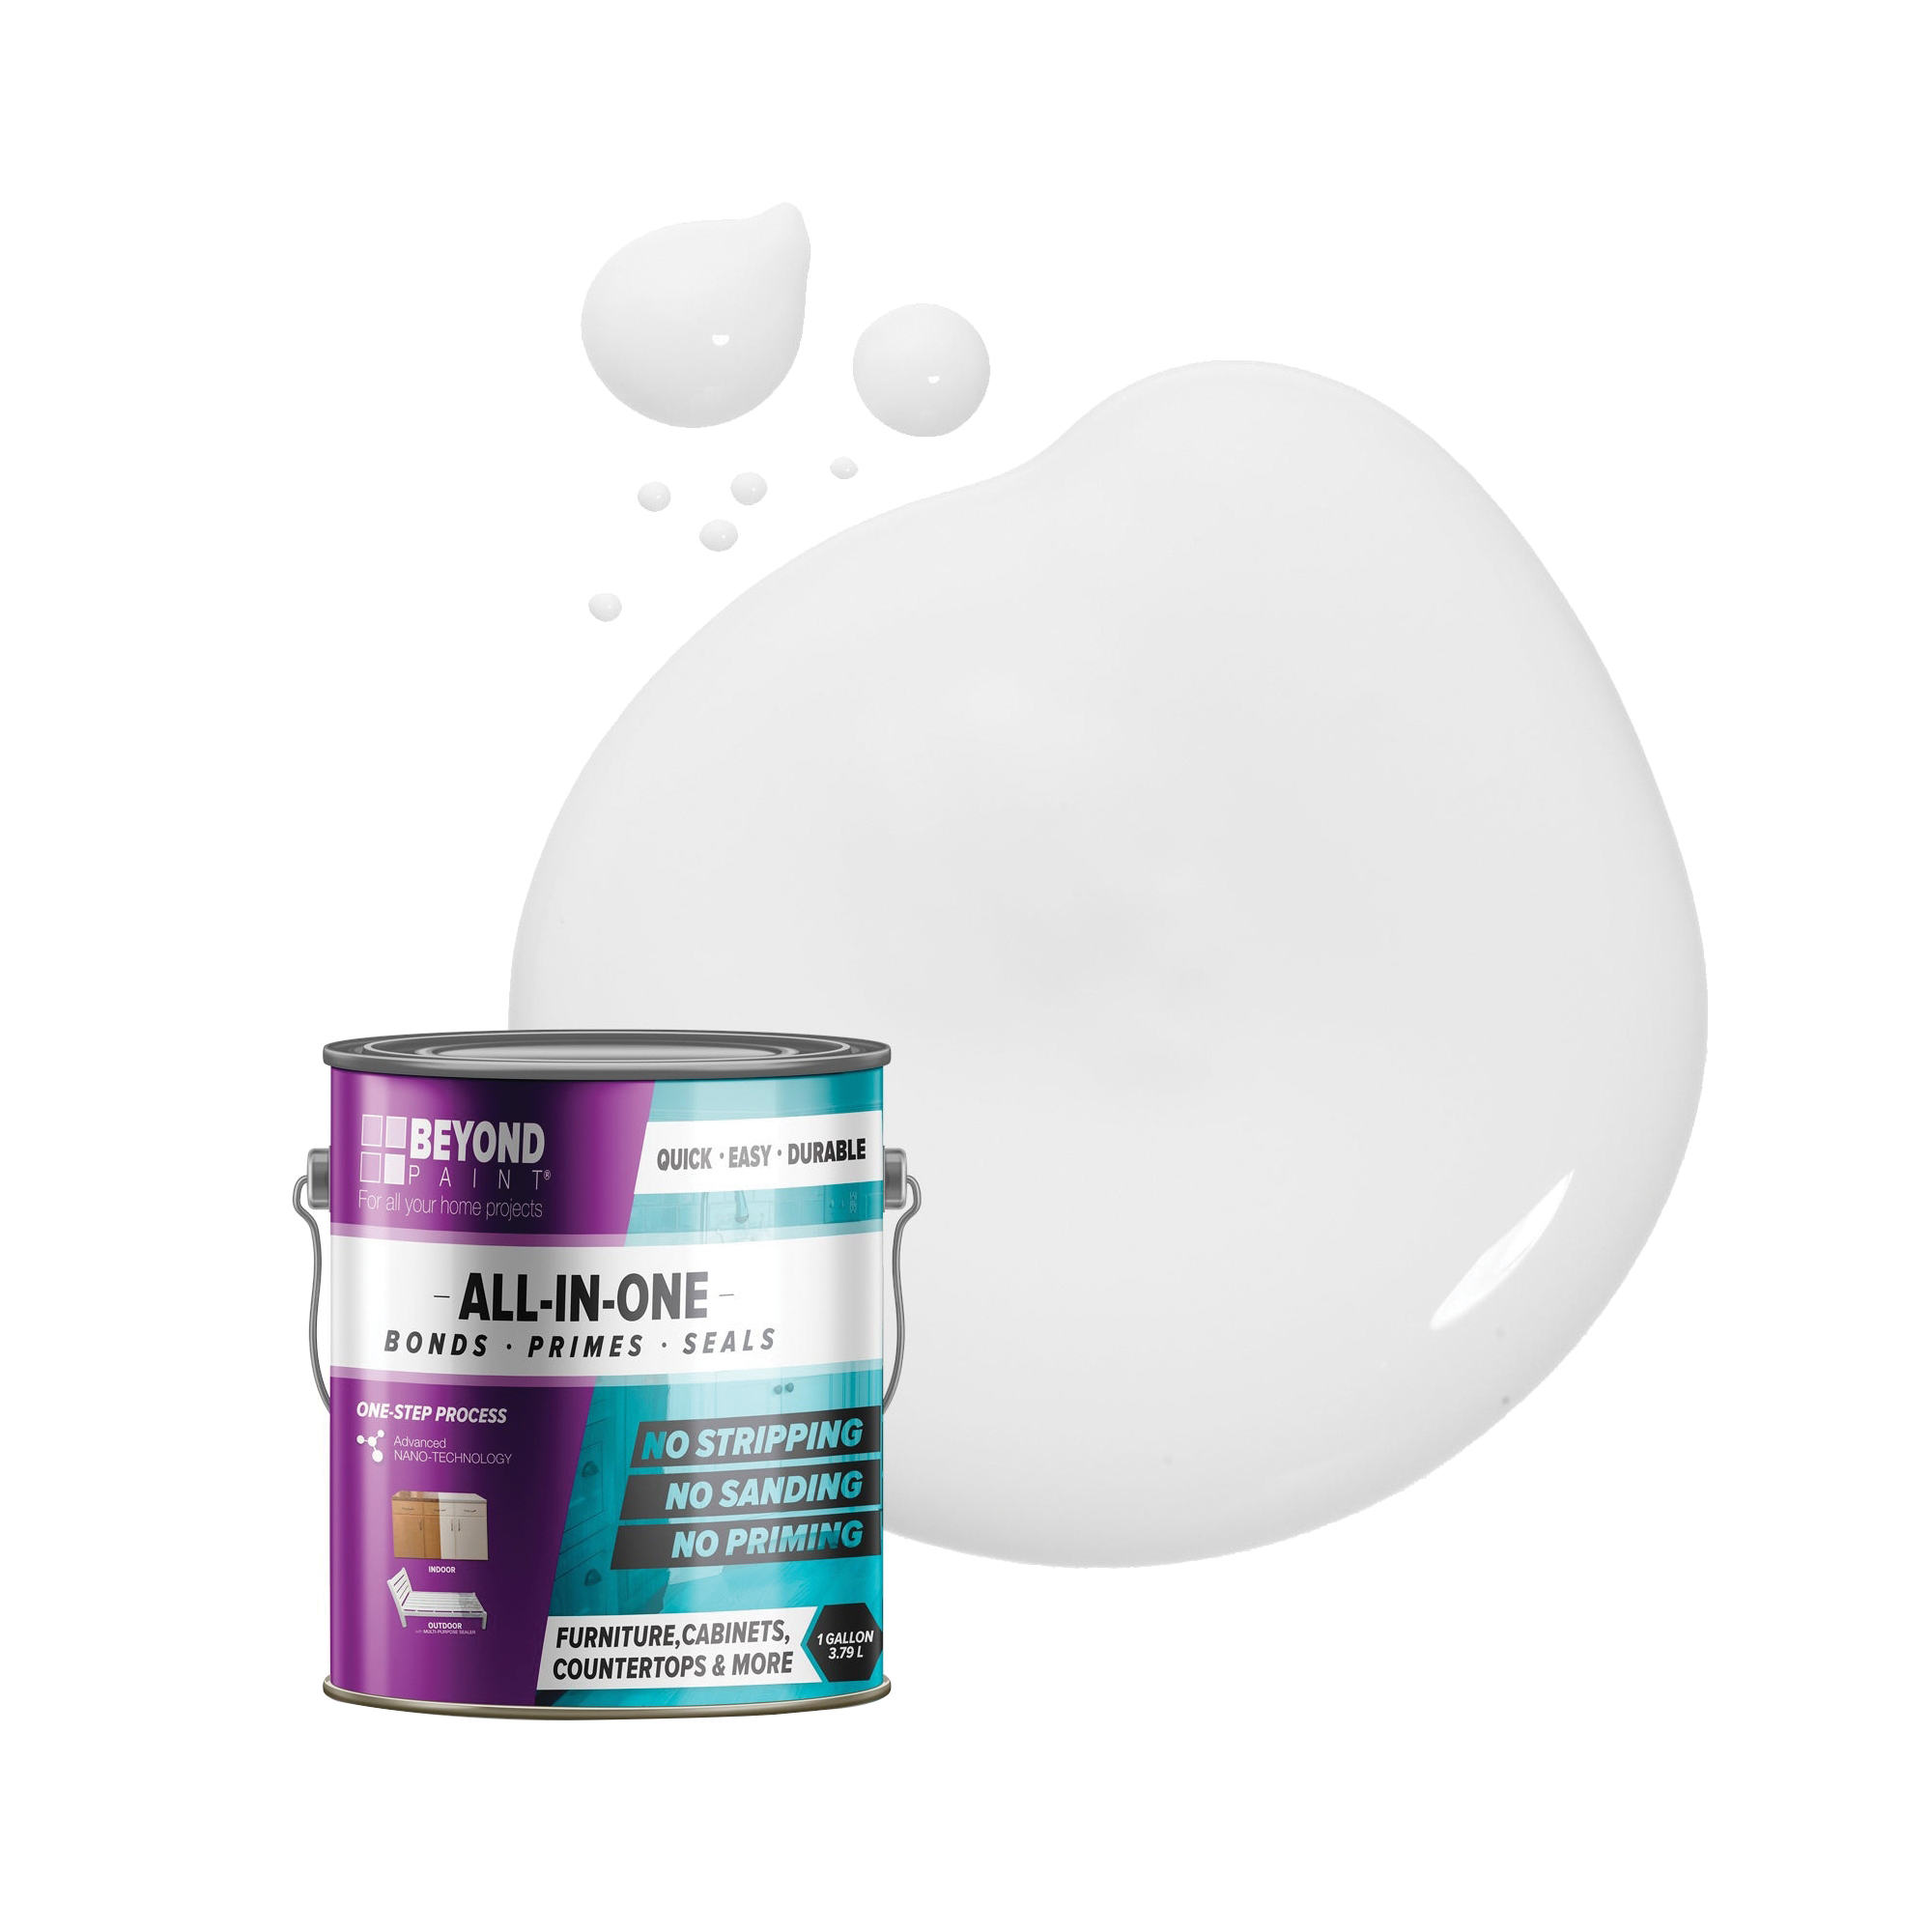 BEYOND PAINT All-In-One Series BP24 Craft Paint, Flat, Bright White, 1 gal